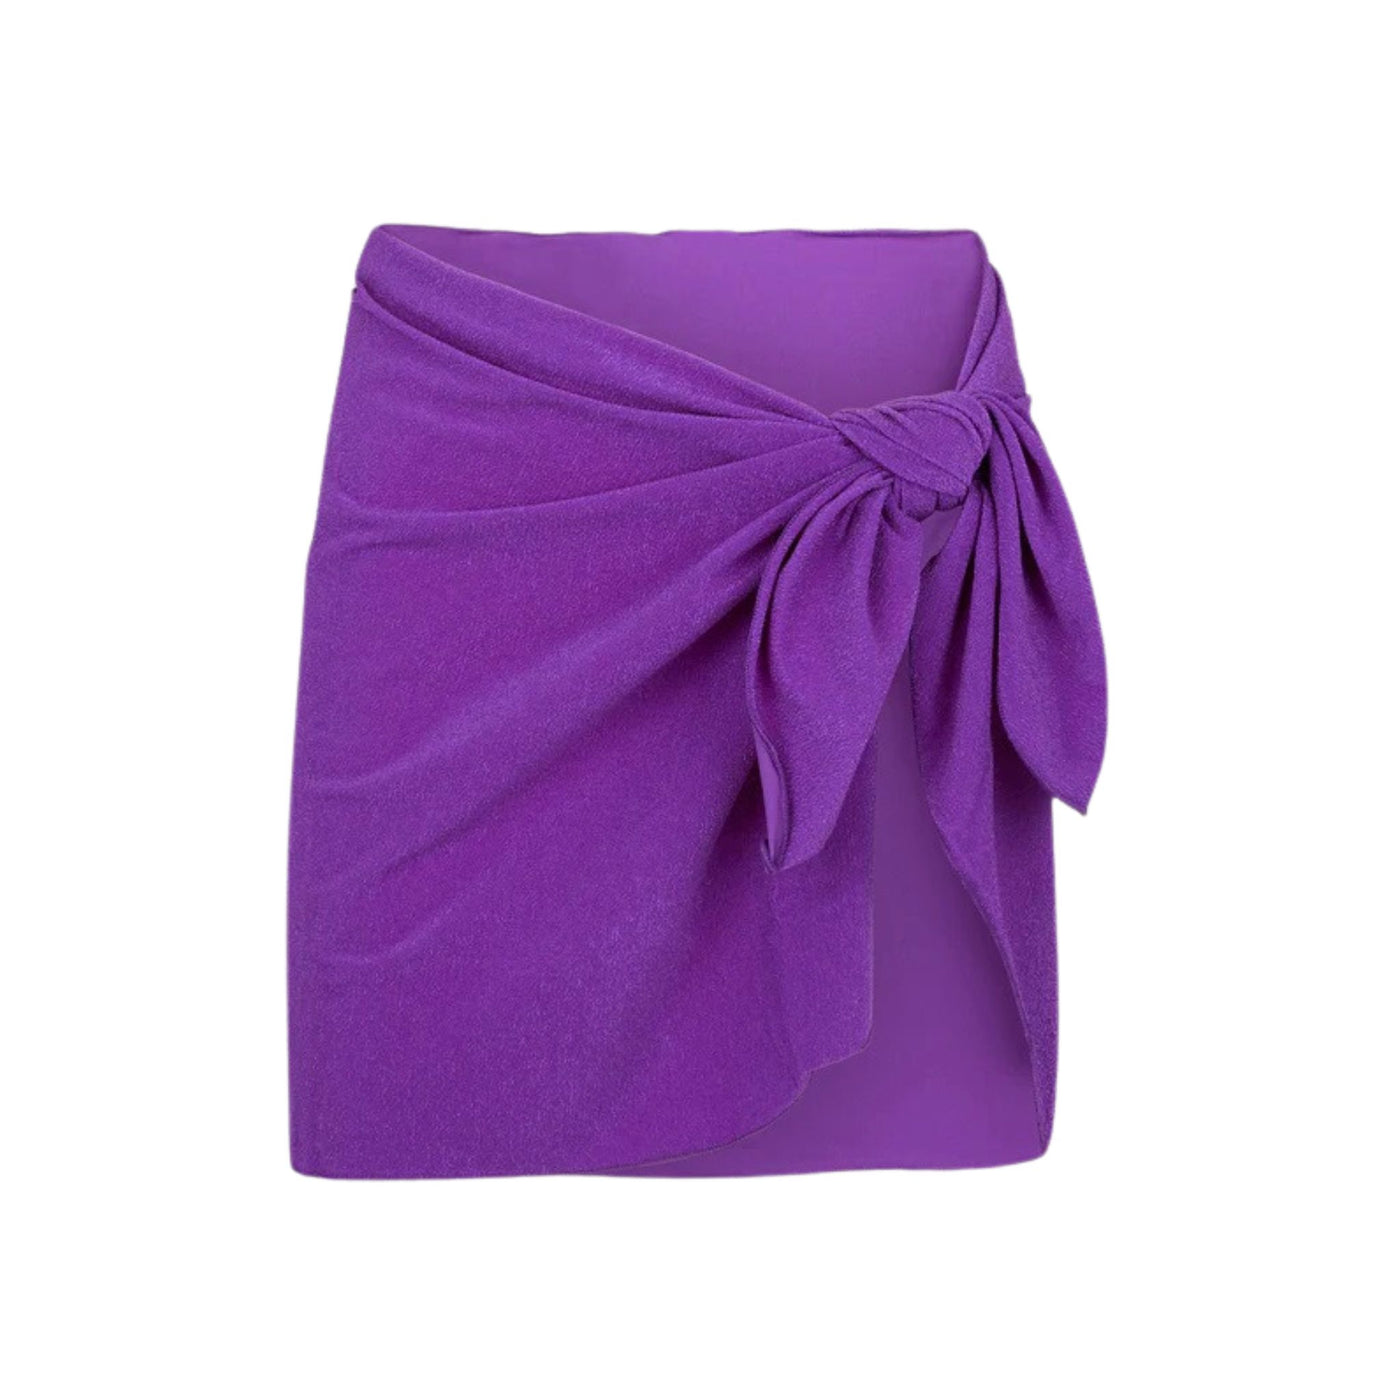 Pareo woman purple in solid color